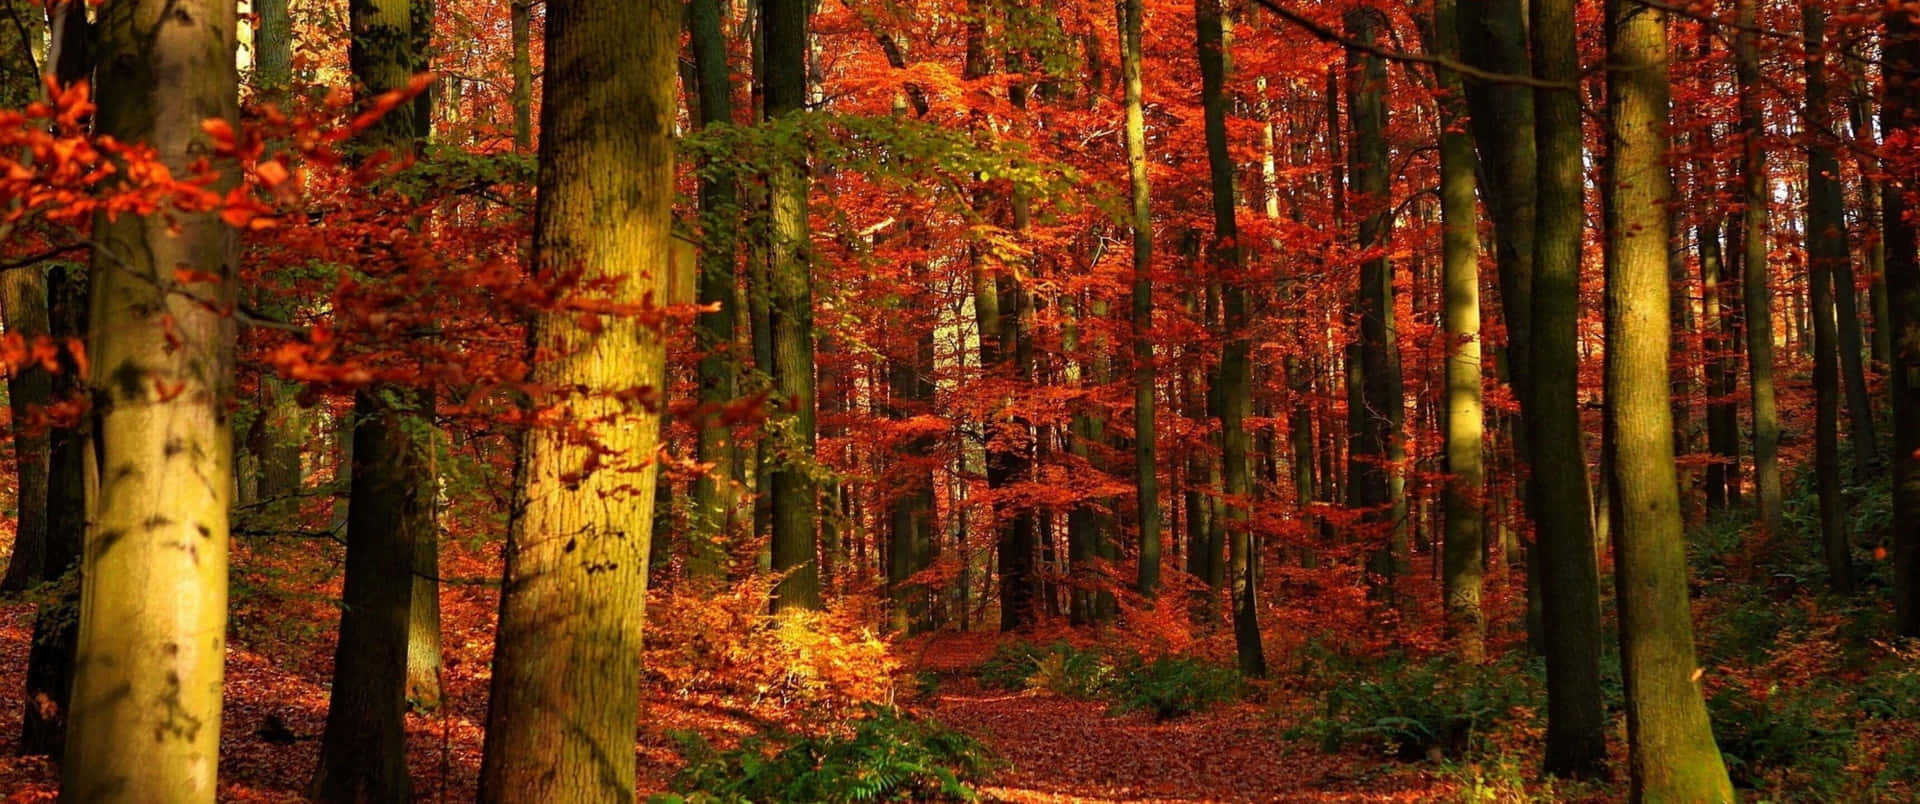 Fall arrives in a riot of color Wallpaper